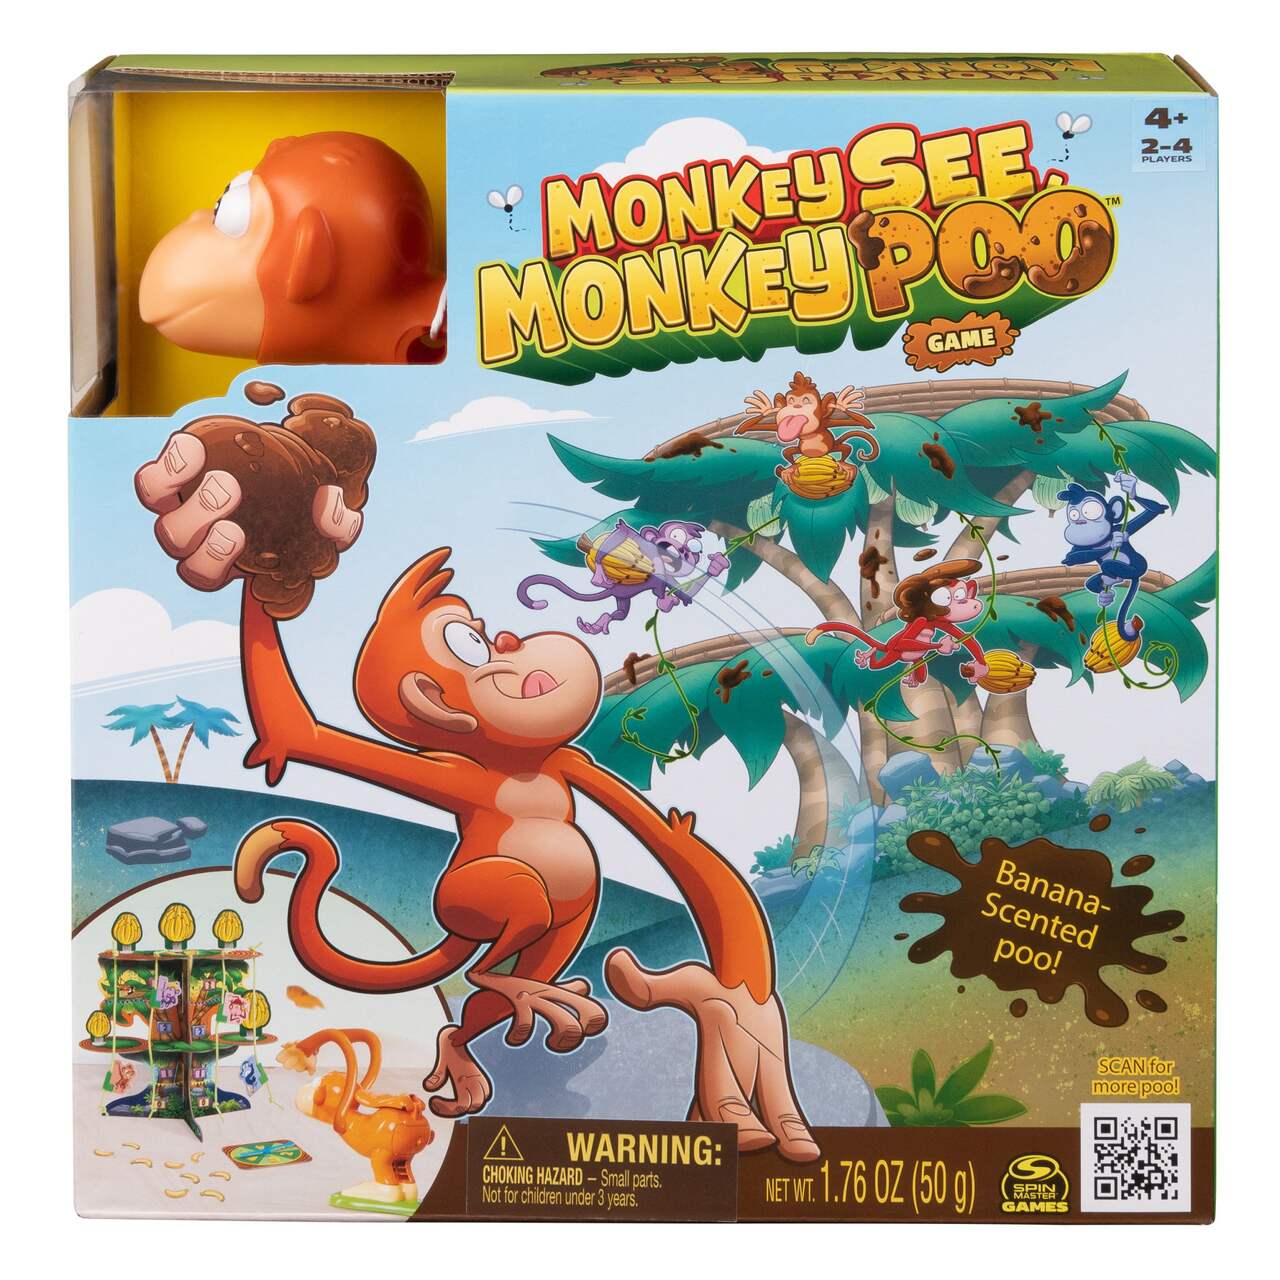 https://media-www.canadiantire.ca/product/seasonal-gardening/toys/toys-games/1500118/monkey-see-monkey-poo-67a36513-6387-4c19-a546-6bd206f5ae4d-jpgrendition.jpg?imdensity=1&imwidth=640&impolicy=mZoom